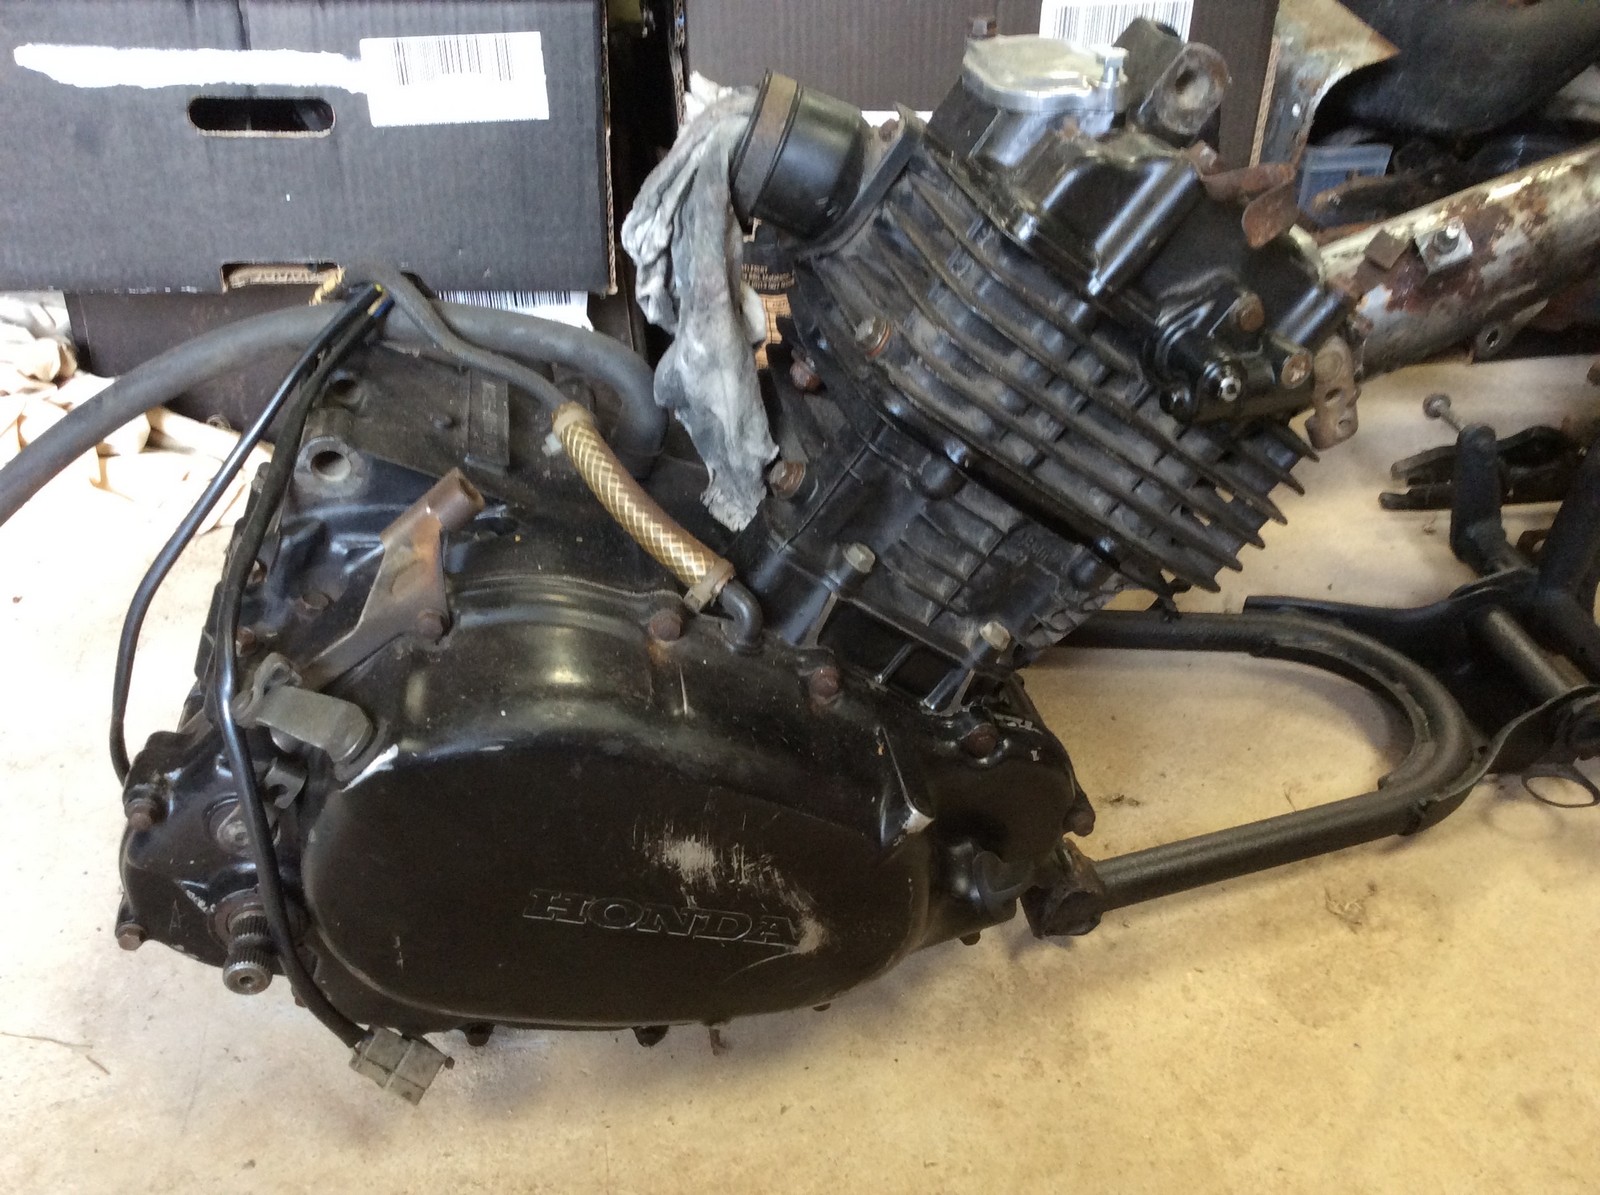 1981 Honda CB 250 RS Completely Dismantled - Image 4 of 9